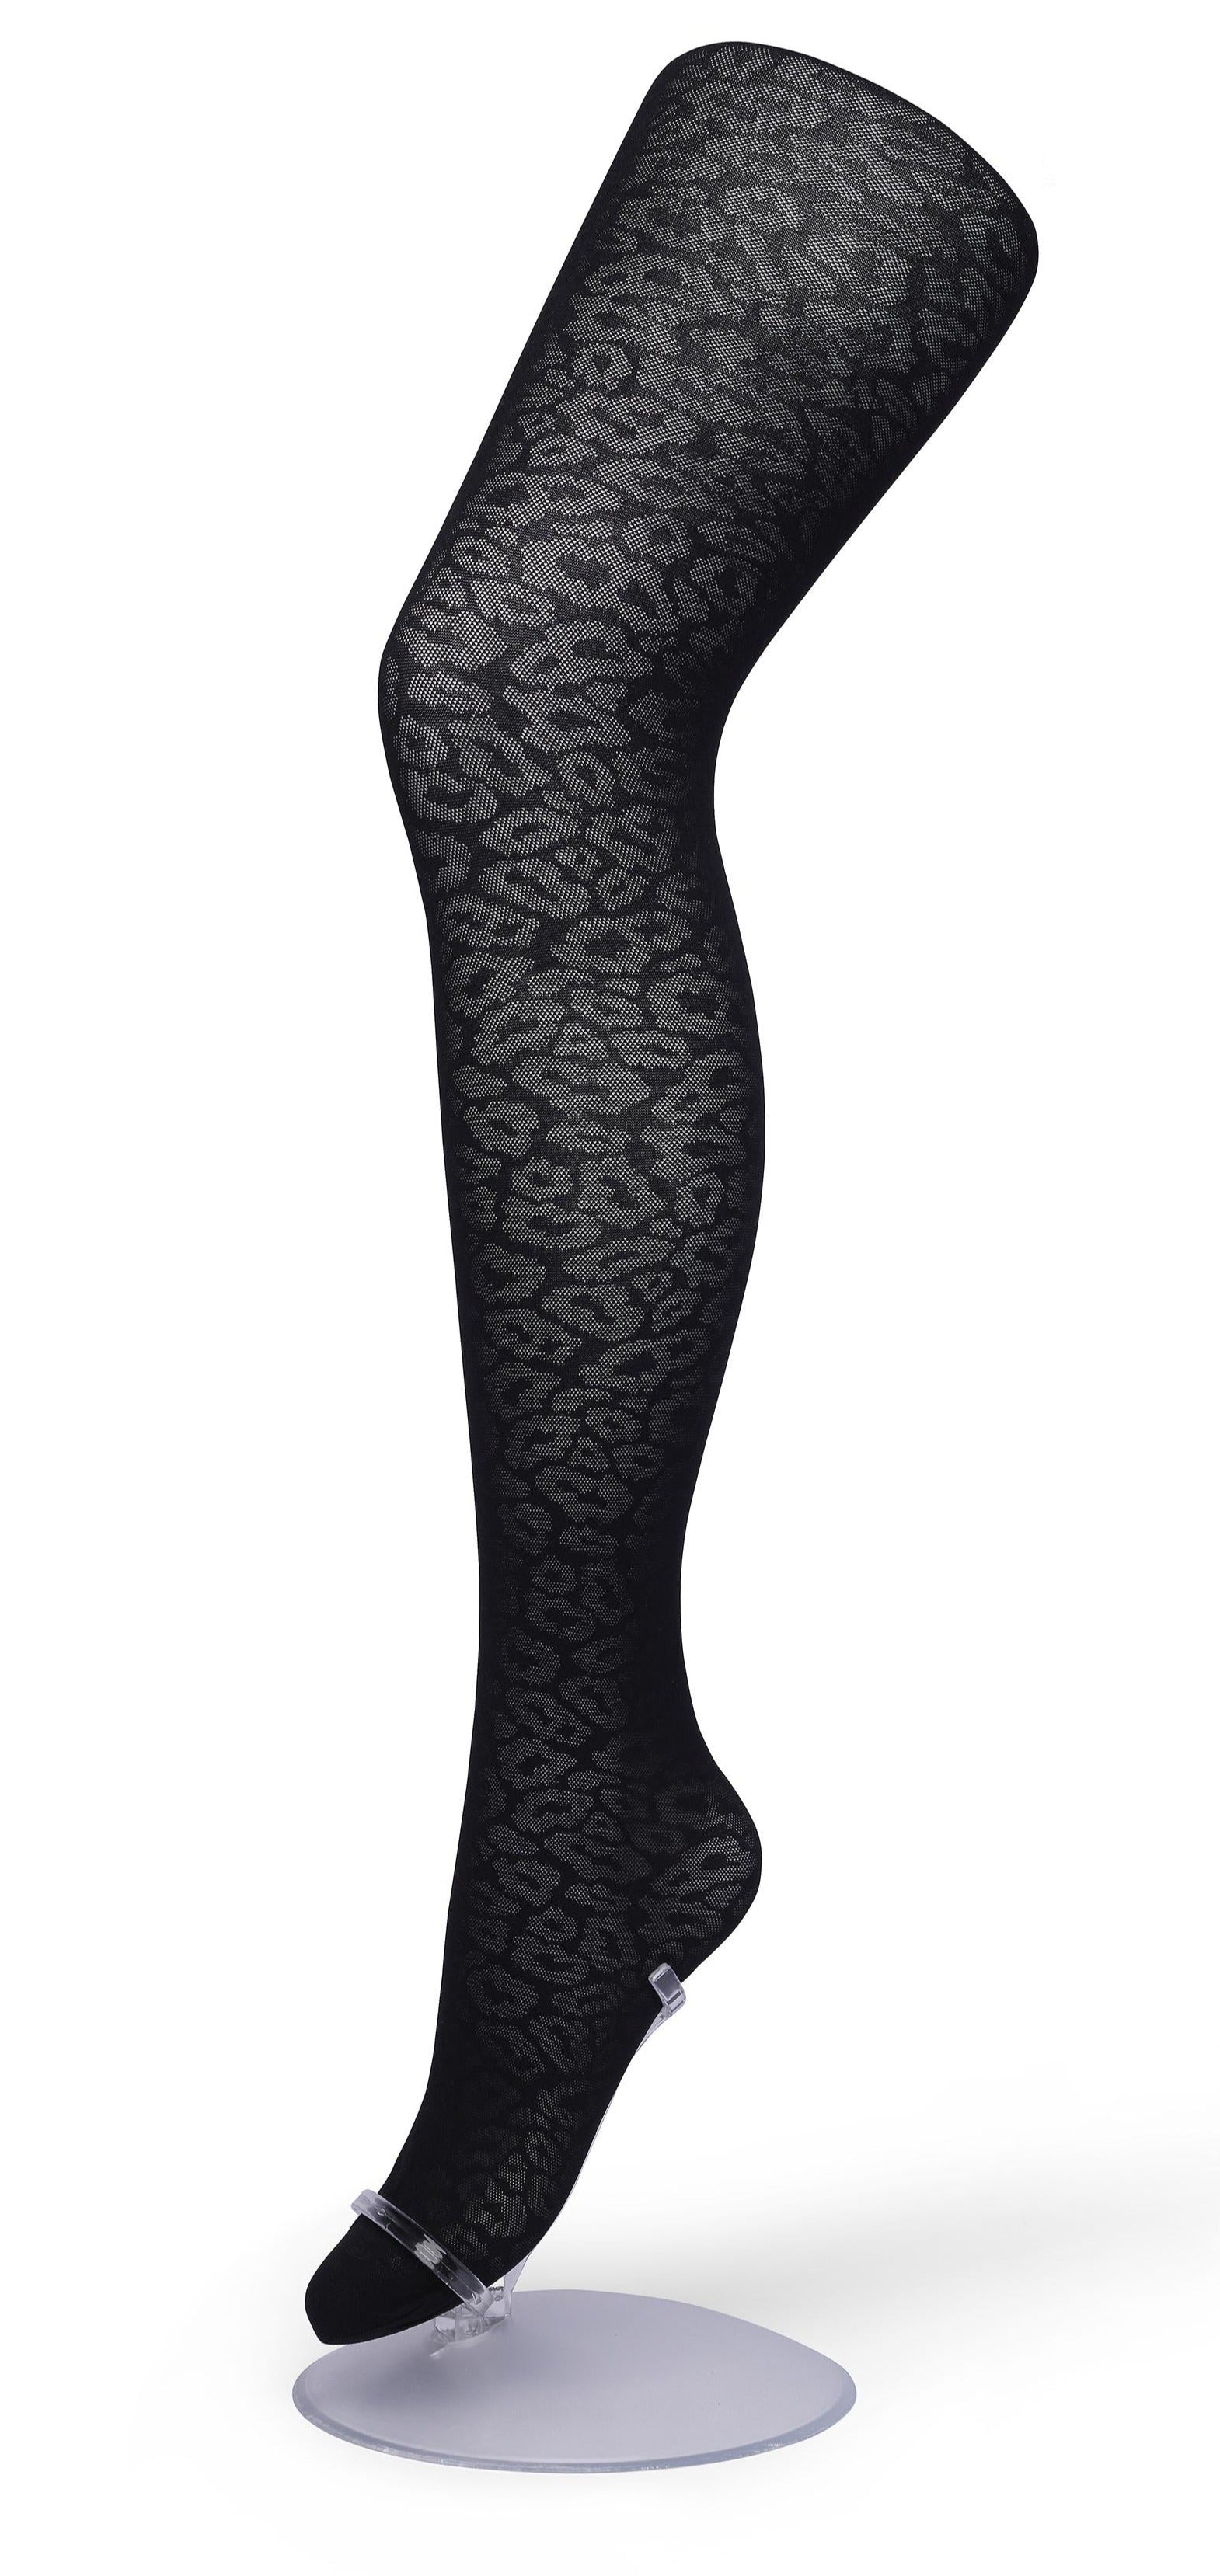 Bonnie Doon Panther Texture Tights - Black opaque fashion tights with a semi sheer micro mesh woven leopard print style pattern, flat seams and gusset.